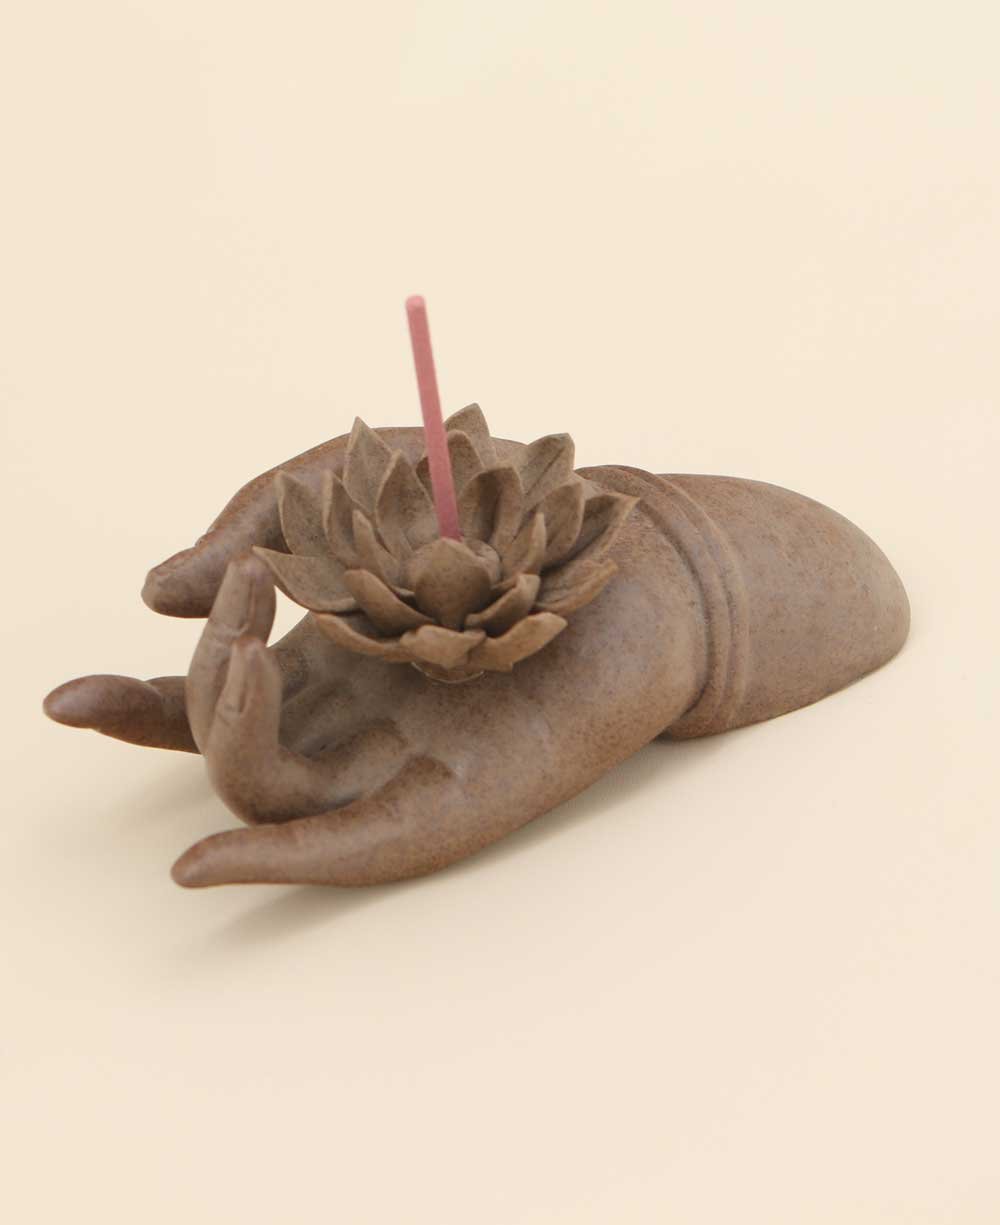 Lotus and Mudra Hand Incense Holder - Incense Holders